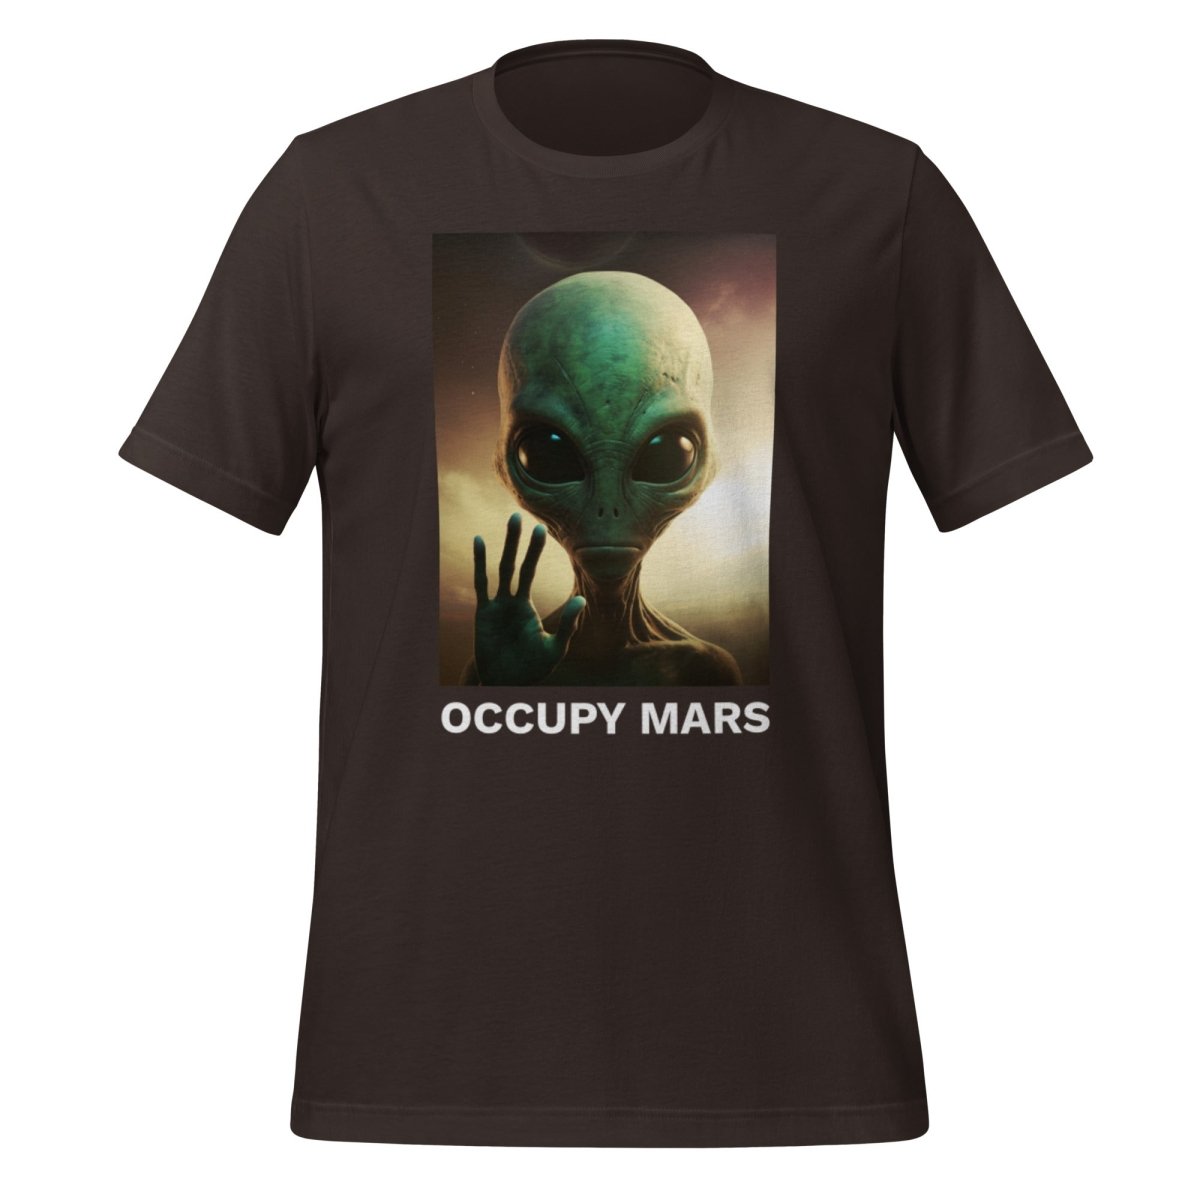 Occupy Mars T - Shirt 2 (unisex) - Brown - AI Store